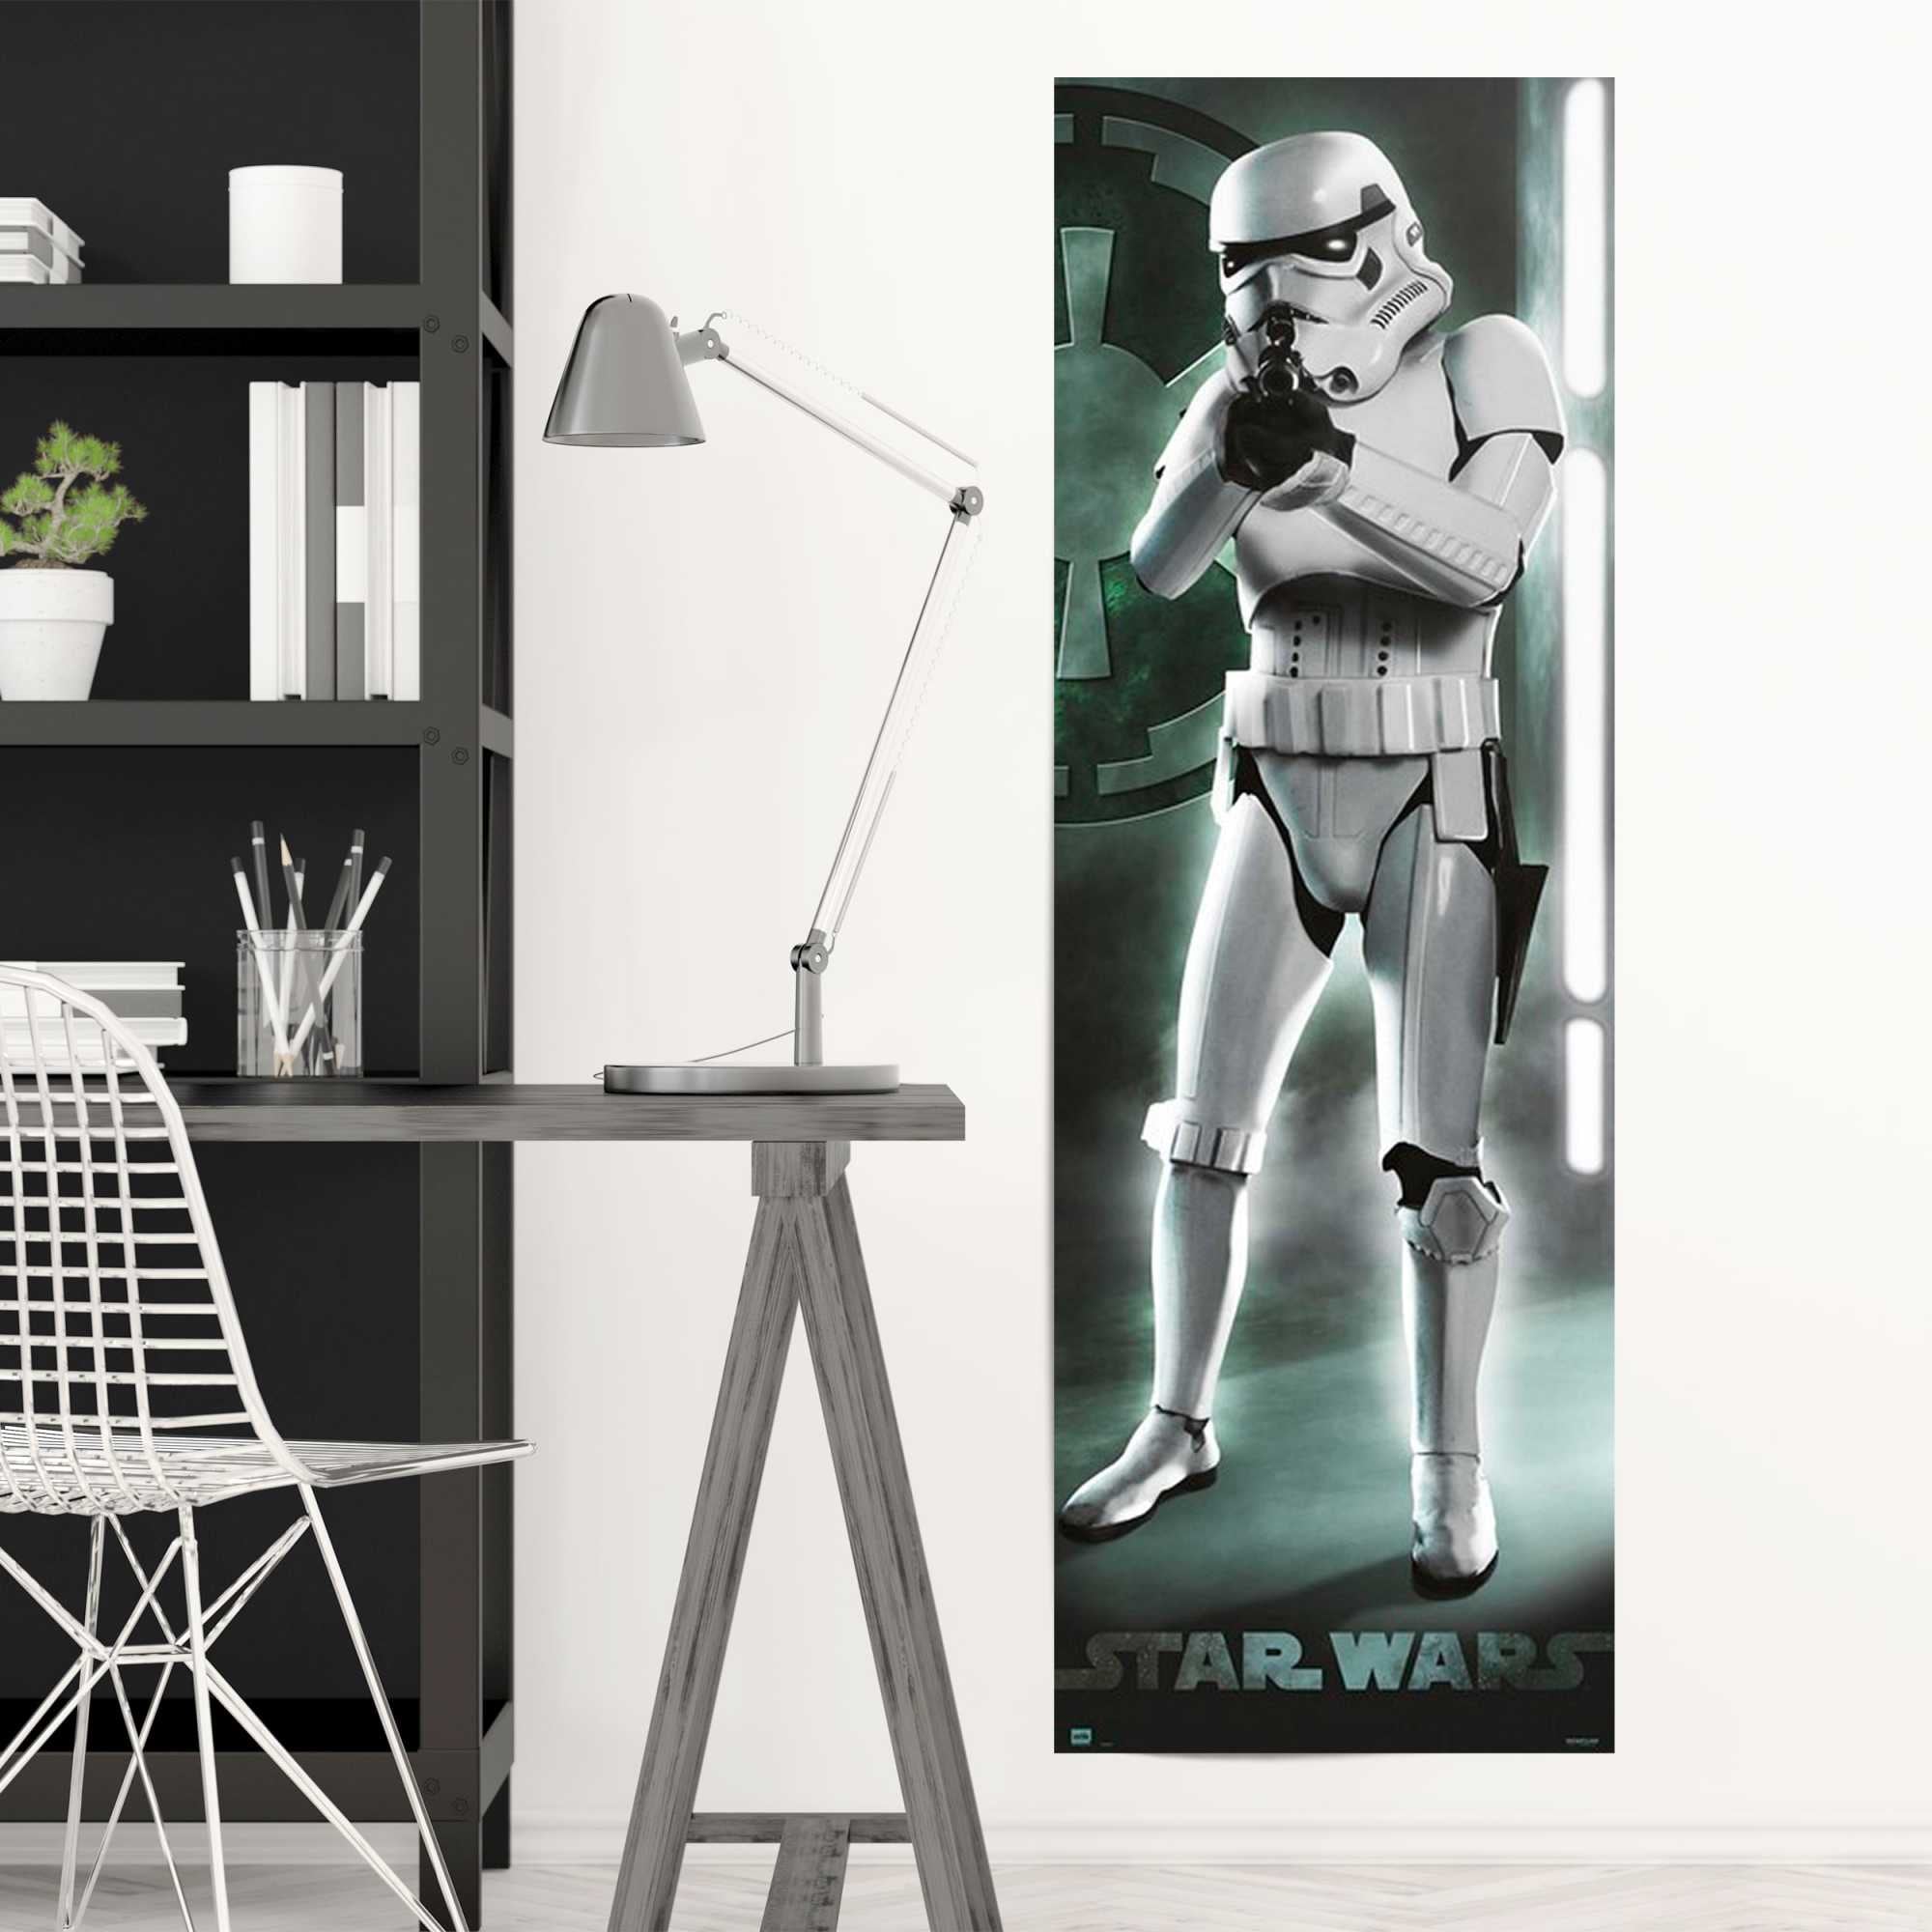 sur Wars Poster Trouver classic Reinders! soldier« »Star -